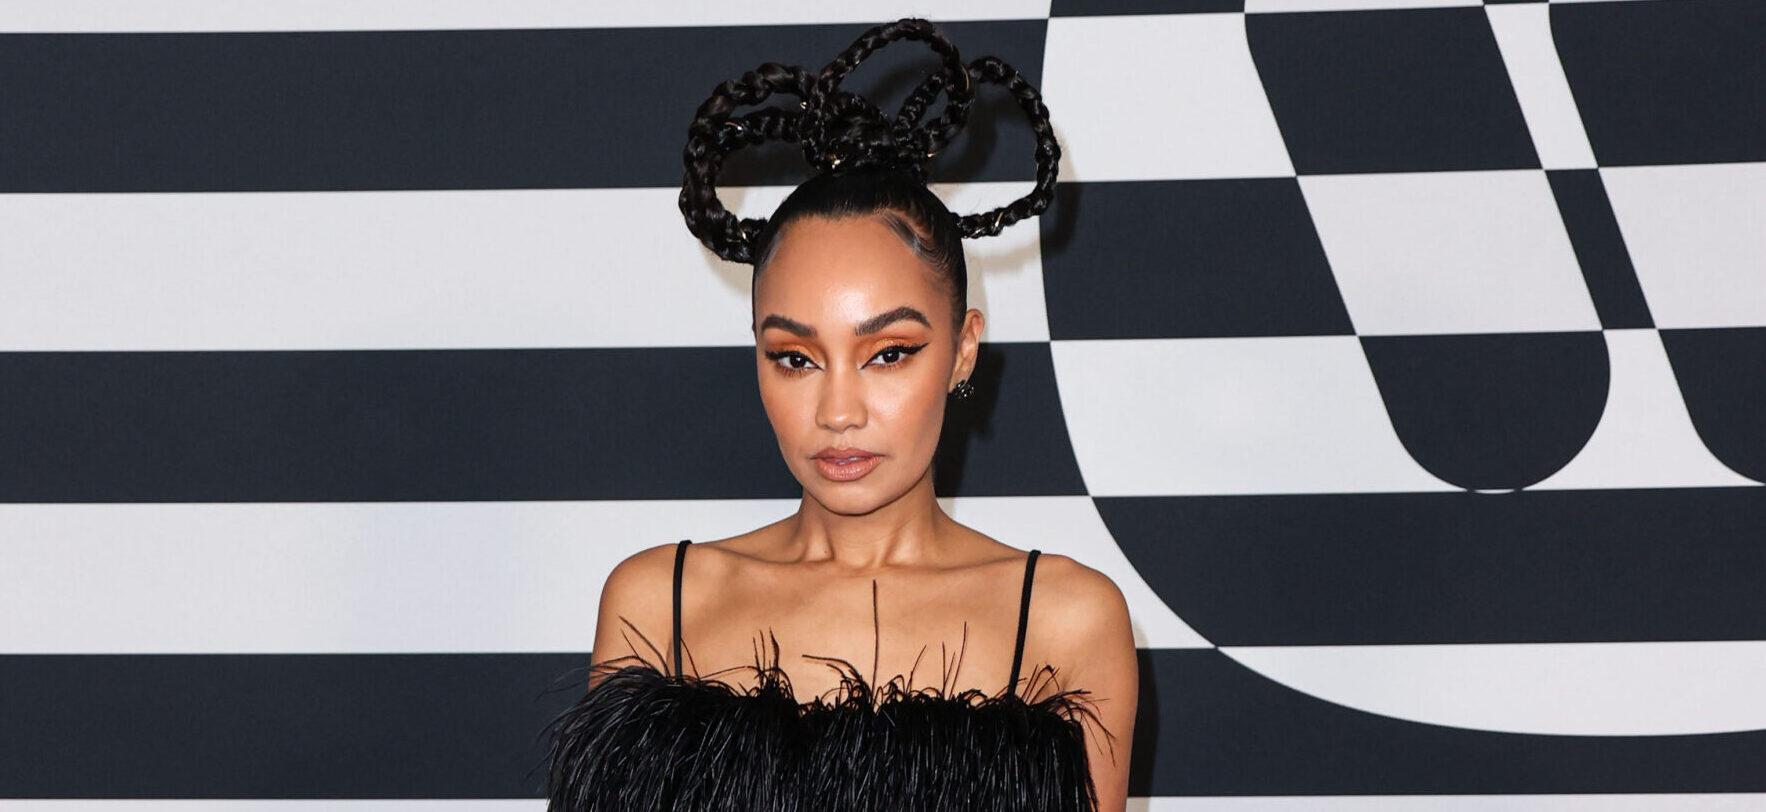 Leigh-Anne Pinnock Reveals She Felt ‘Overlooked’ By The ‘Very White’ Pop Industry While In Little Mix